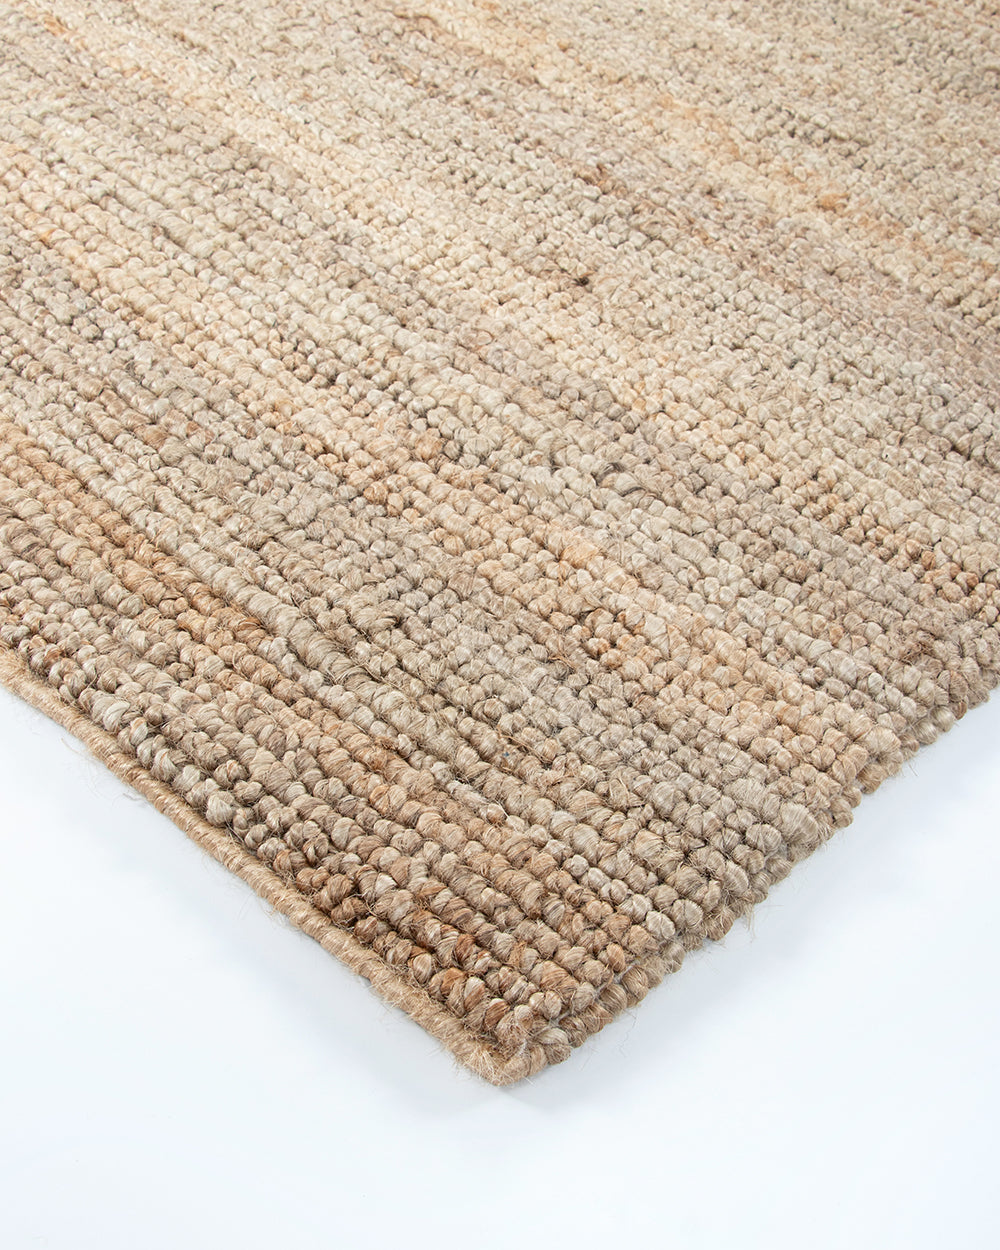 Papeete Floor Rug from Baya Furtex Stockist Make Your House A Home, Furniture Store Bendigo. Free Australia Wide Delivery. 